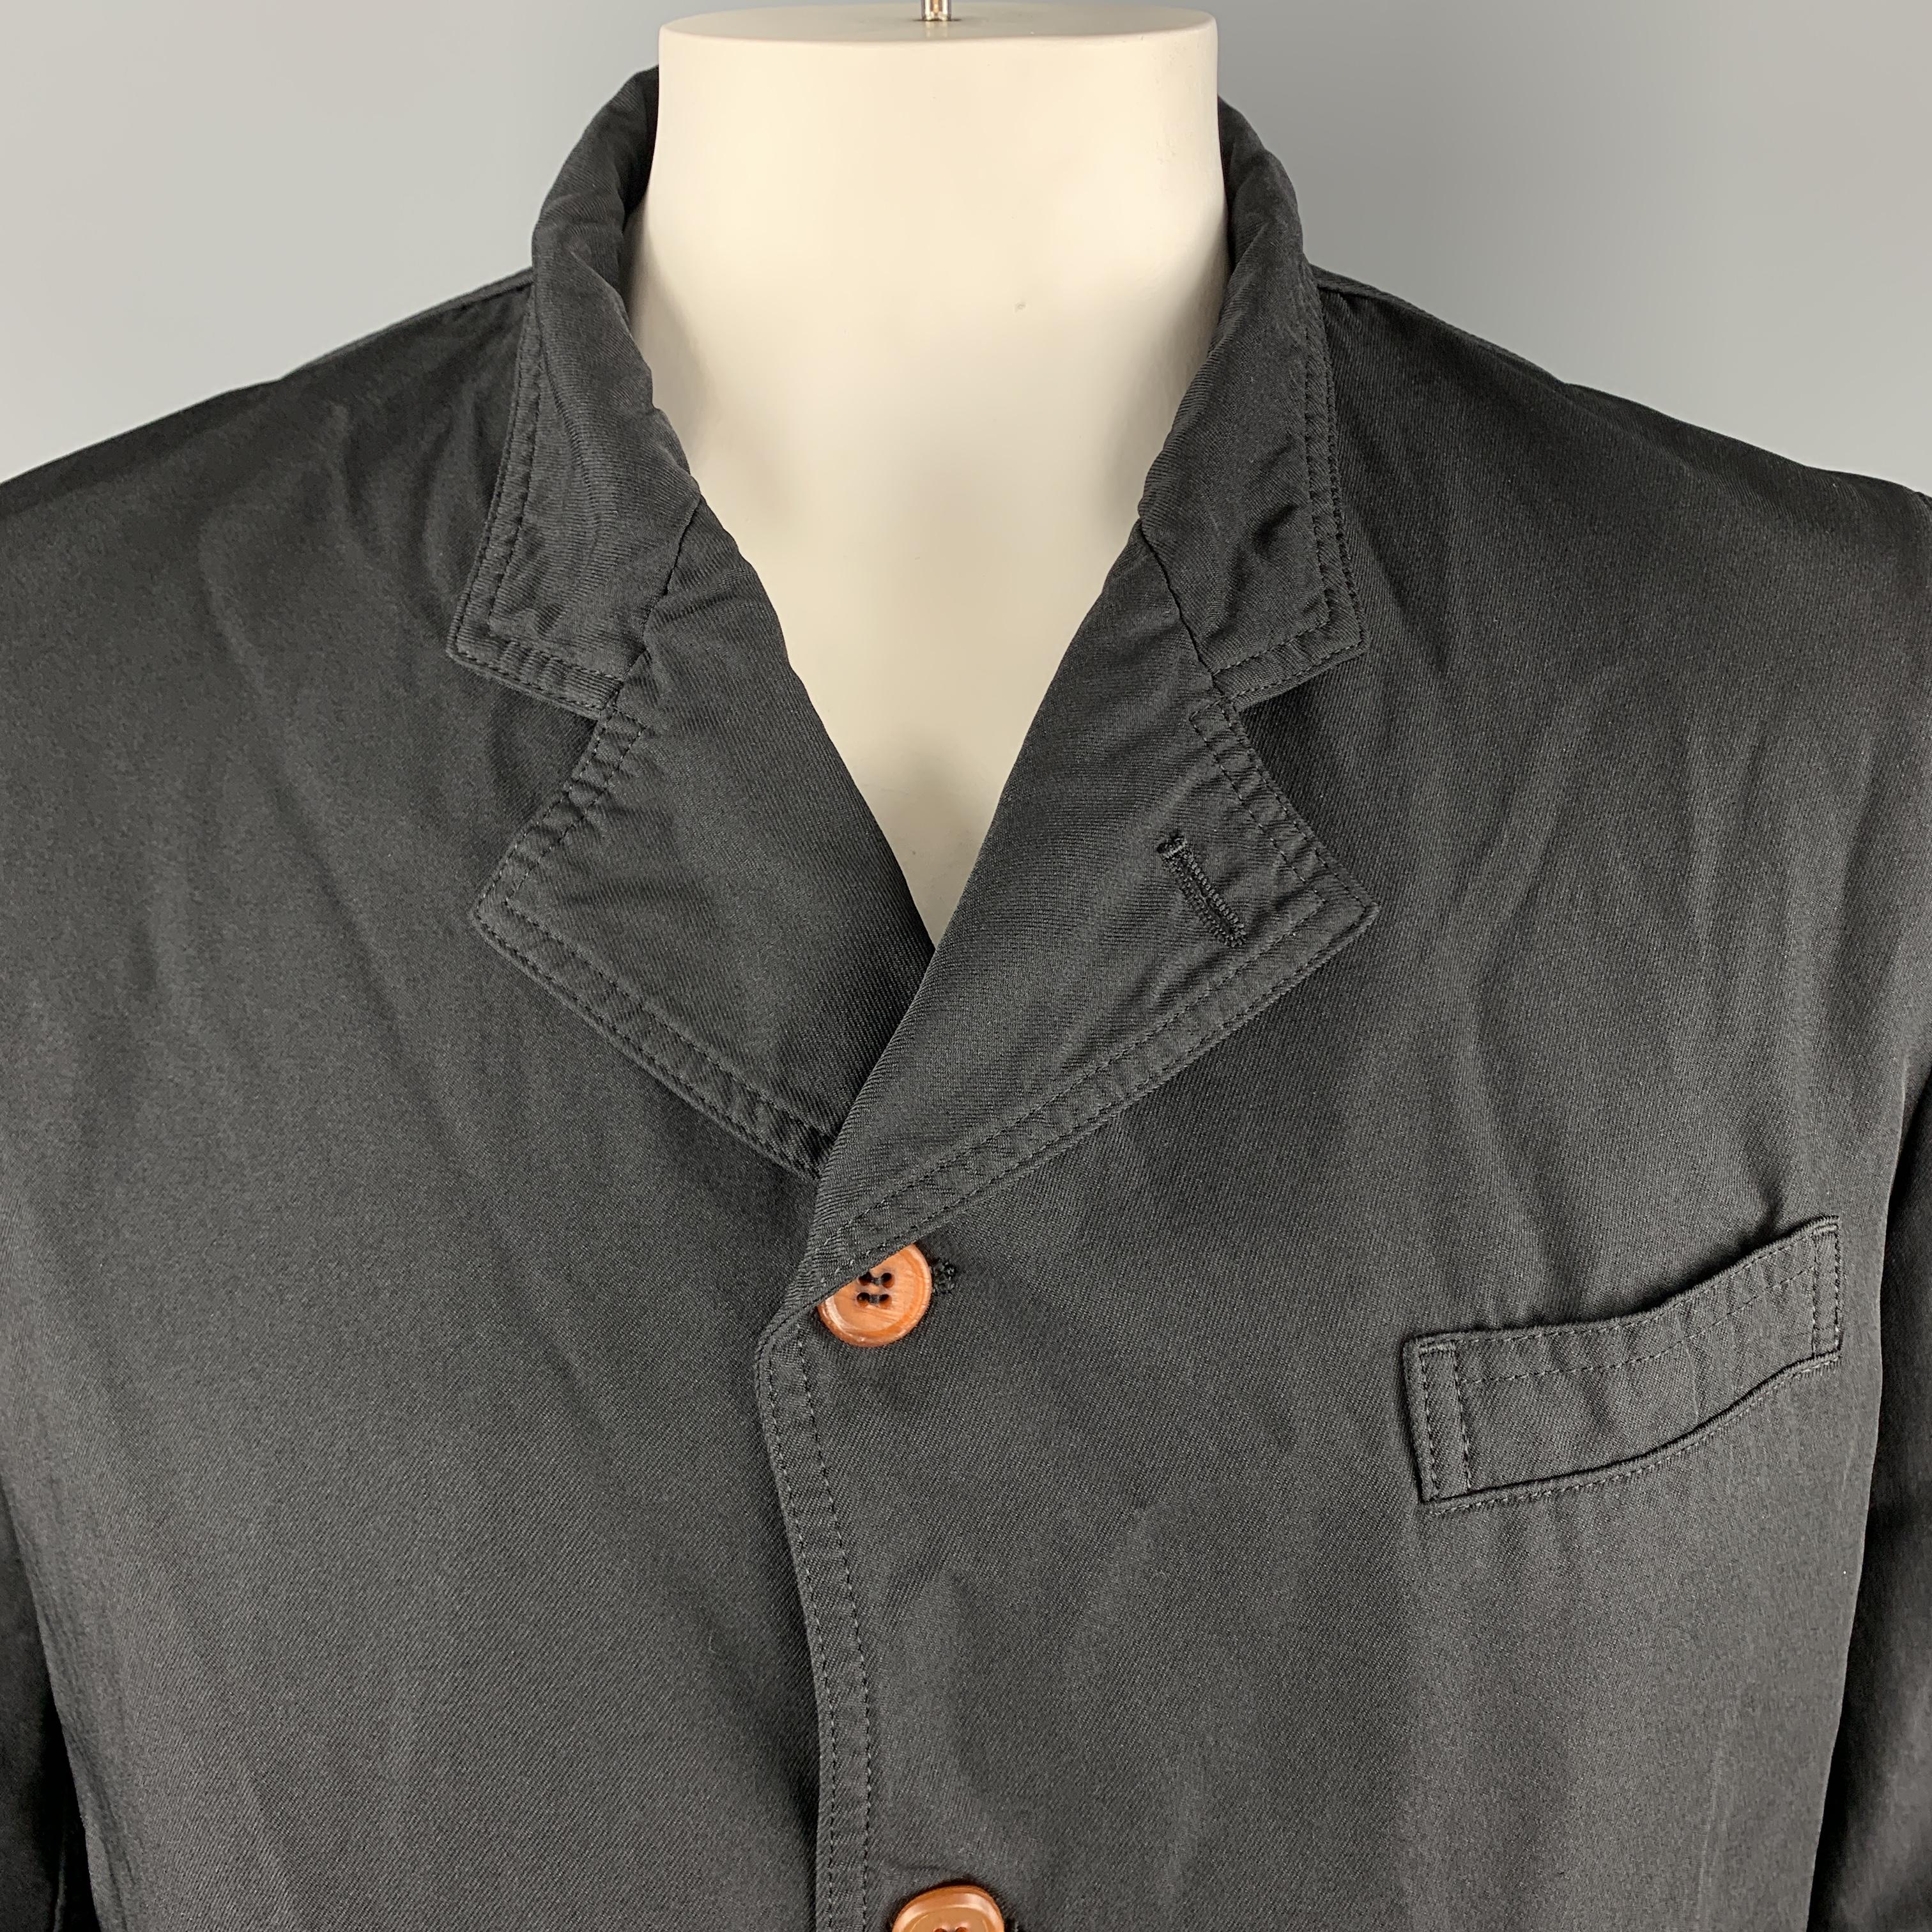 COMME des GARCONS HOMME DEUX sport coat comes in wrinkle textured black poly twill with a notch lapel, single breasted, four button front, and functional button cuffs. Made in Japan.

Excellent Pre-Owned Condition.
Marked: XL AD